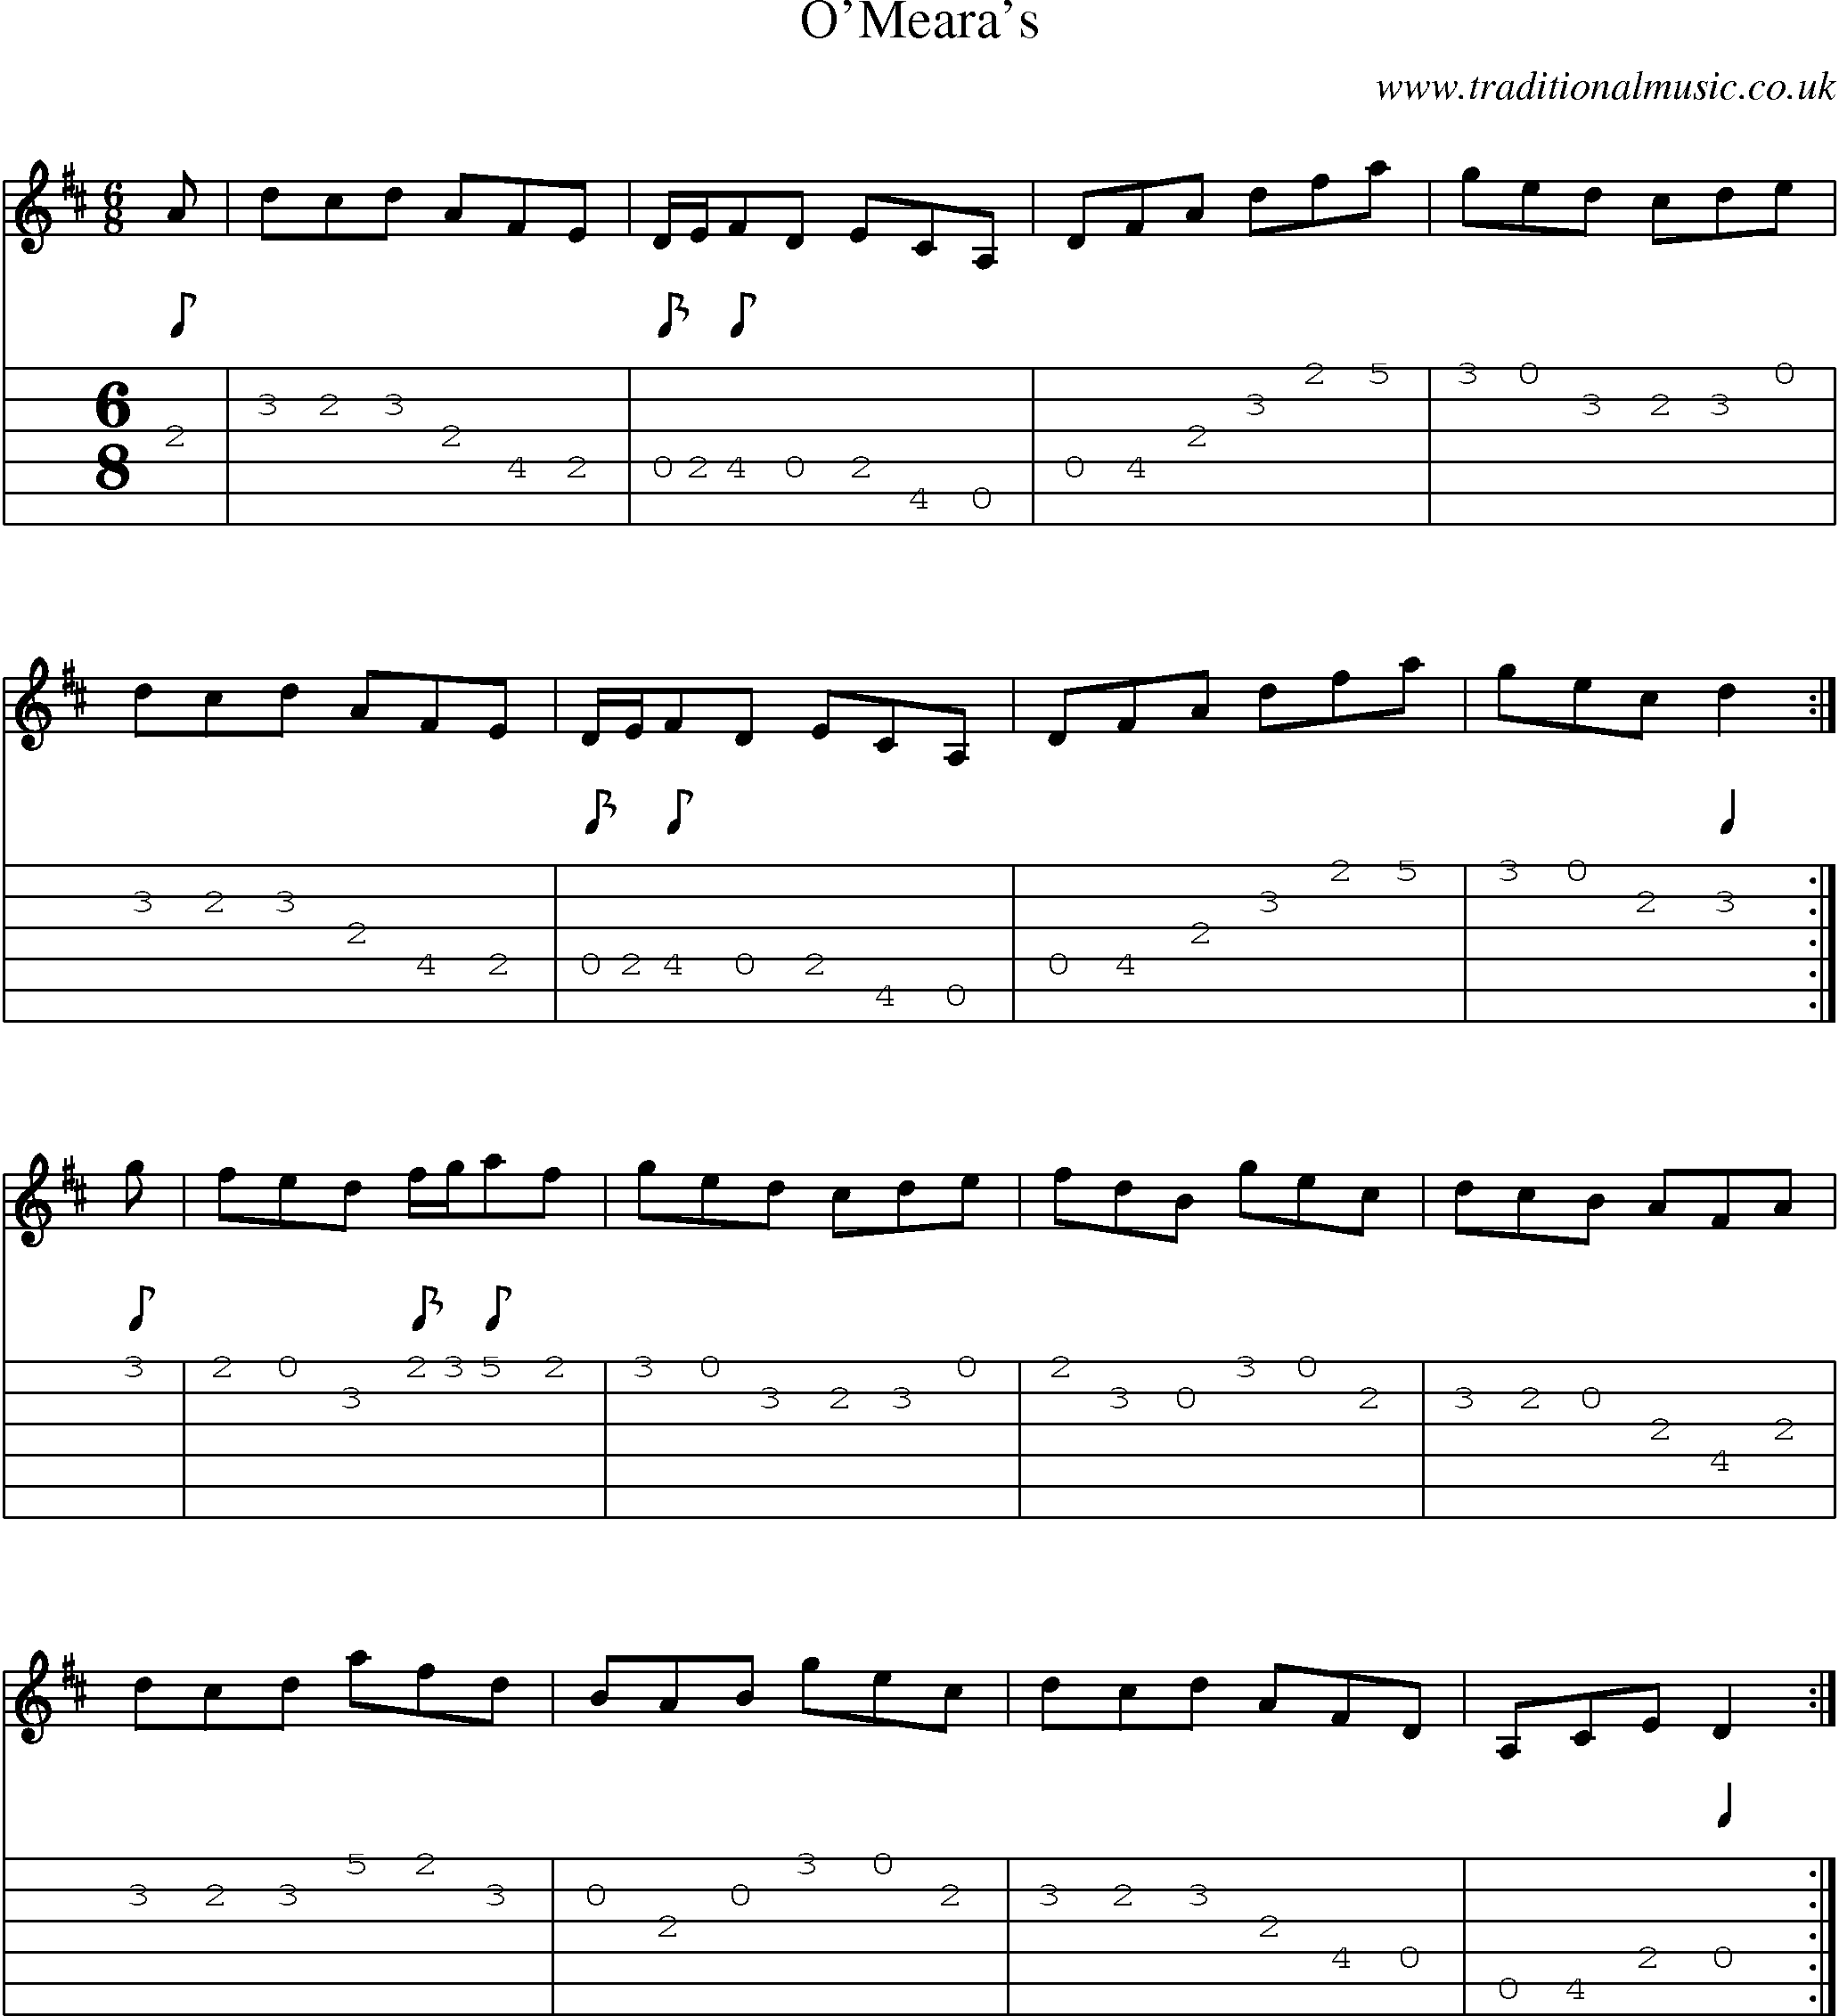 Music Score and Guitar Tabs for Omearas